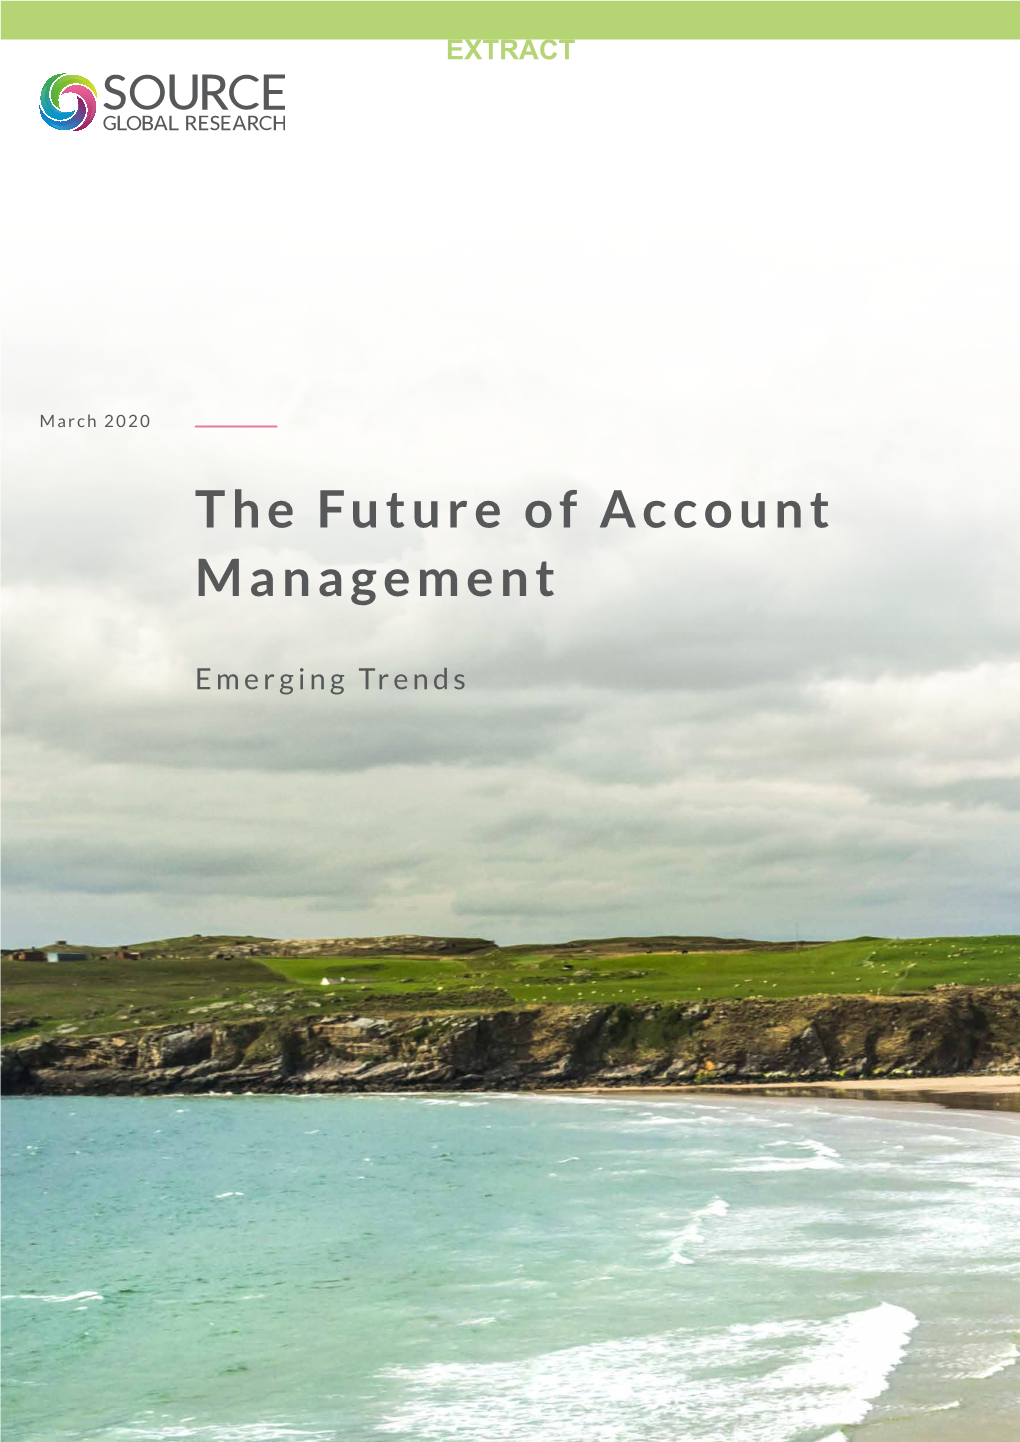 The Future of Account Management